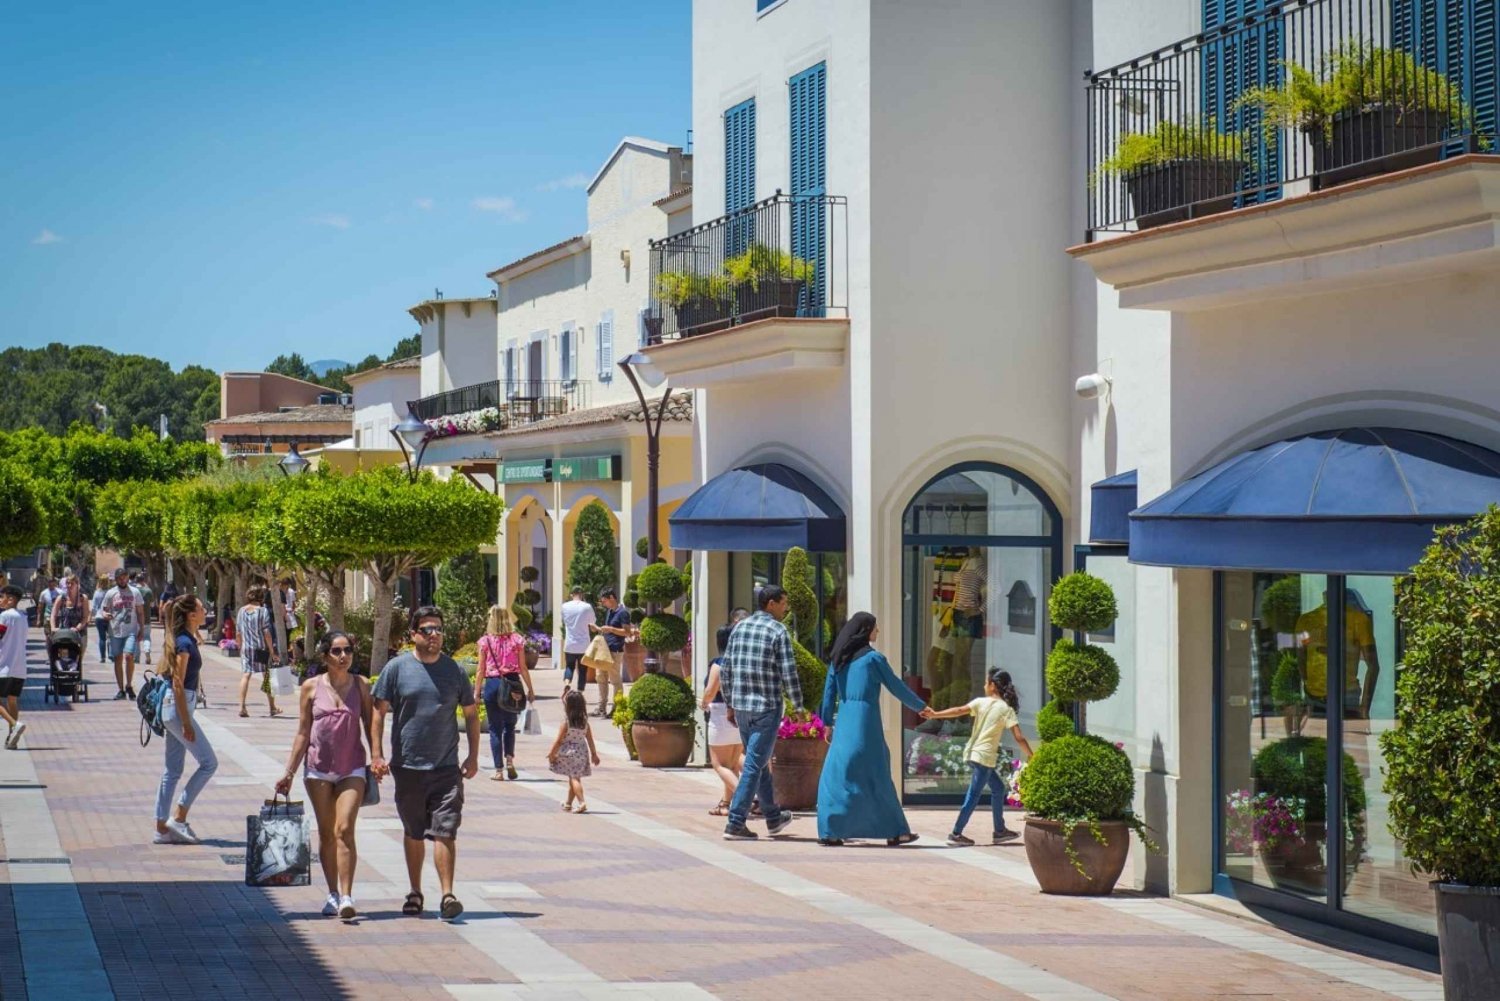 Mallorca: Fashion Outlet Shopping Udflugt med bus